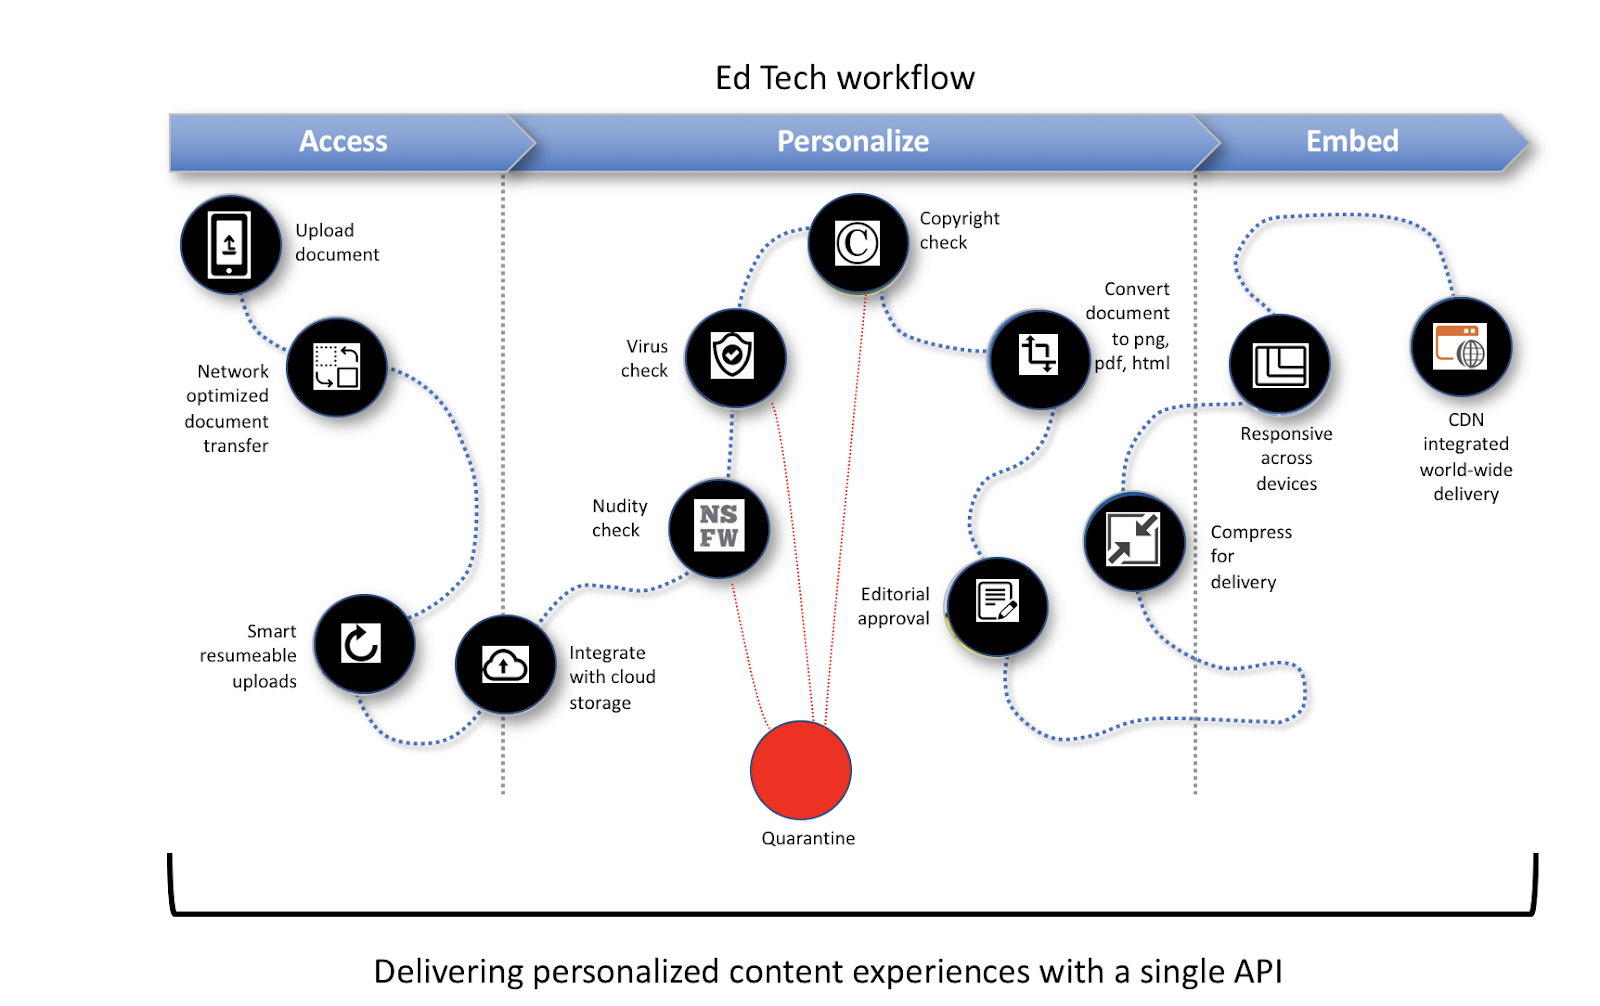 An example of an Ed Tech workflow